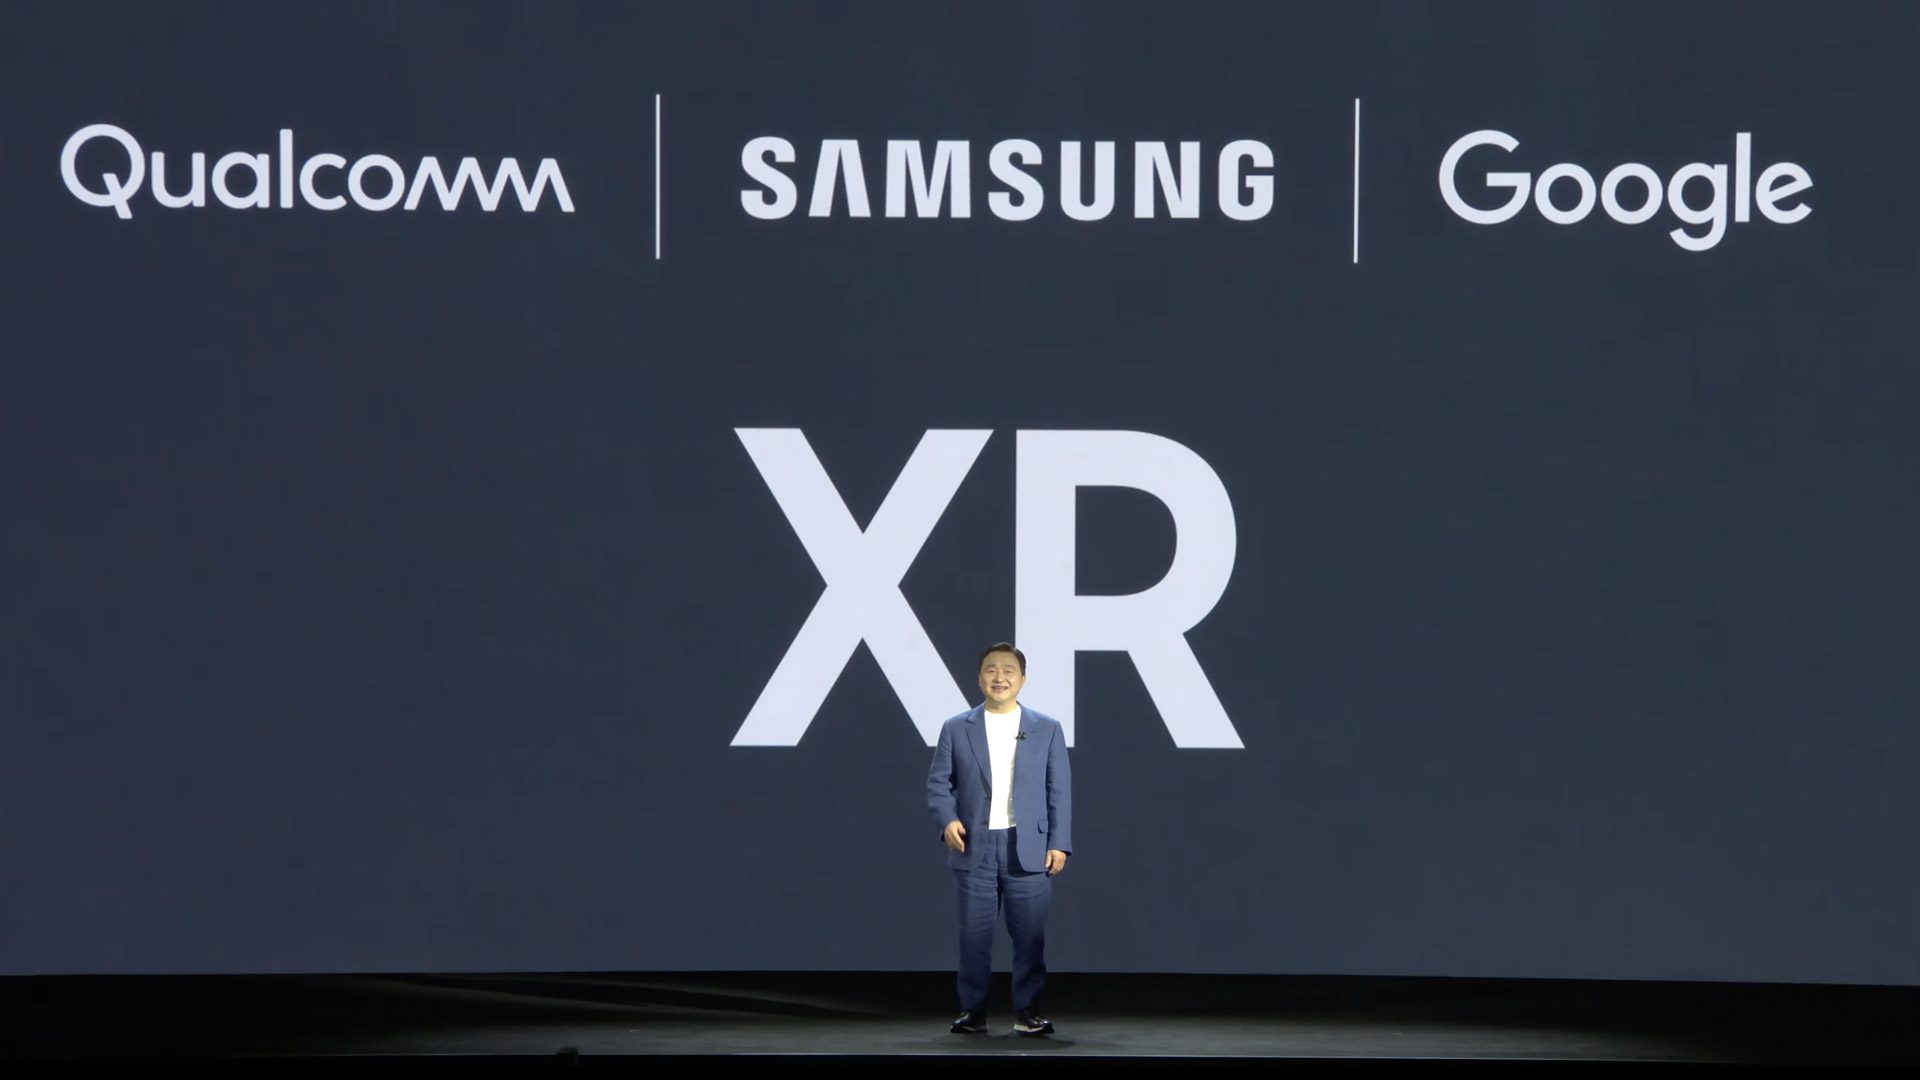 New XR Platform From Samsung and Google Will be Announced, if Not Launched, This Year